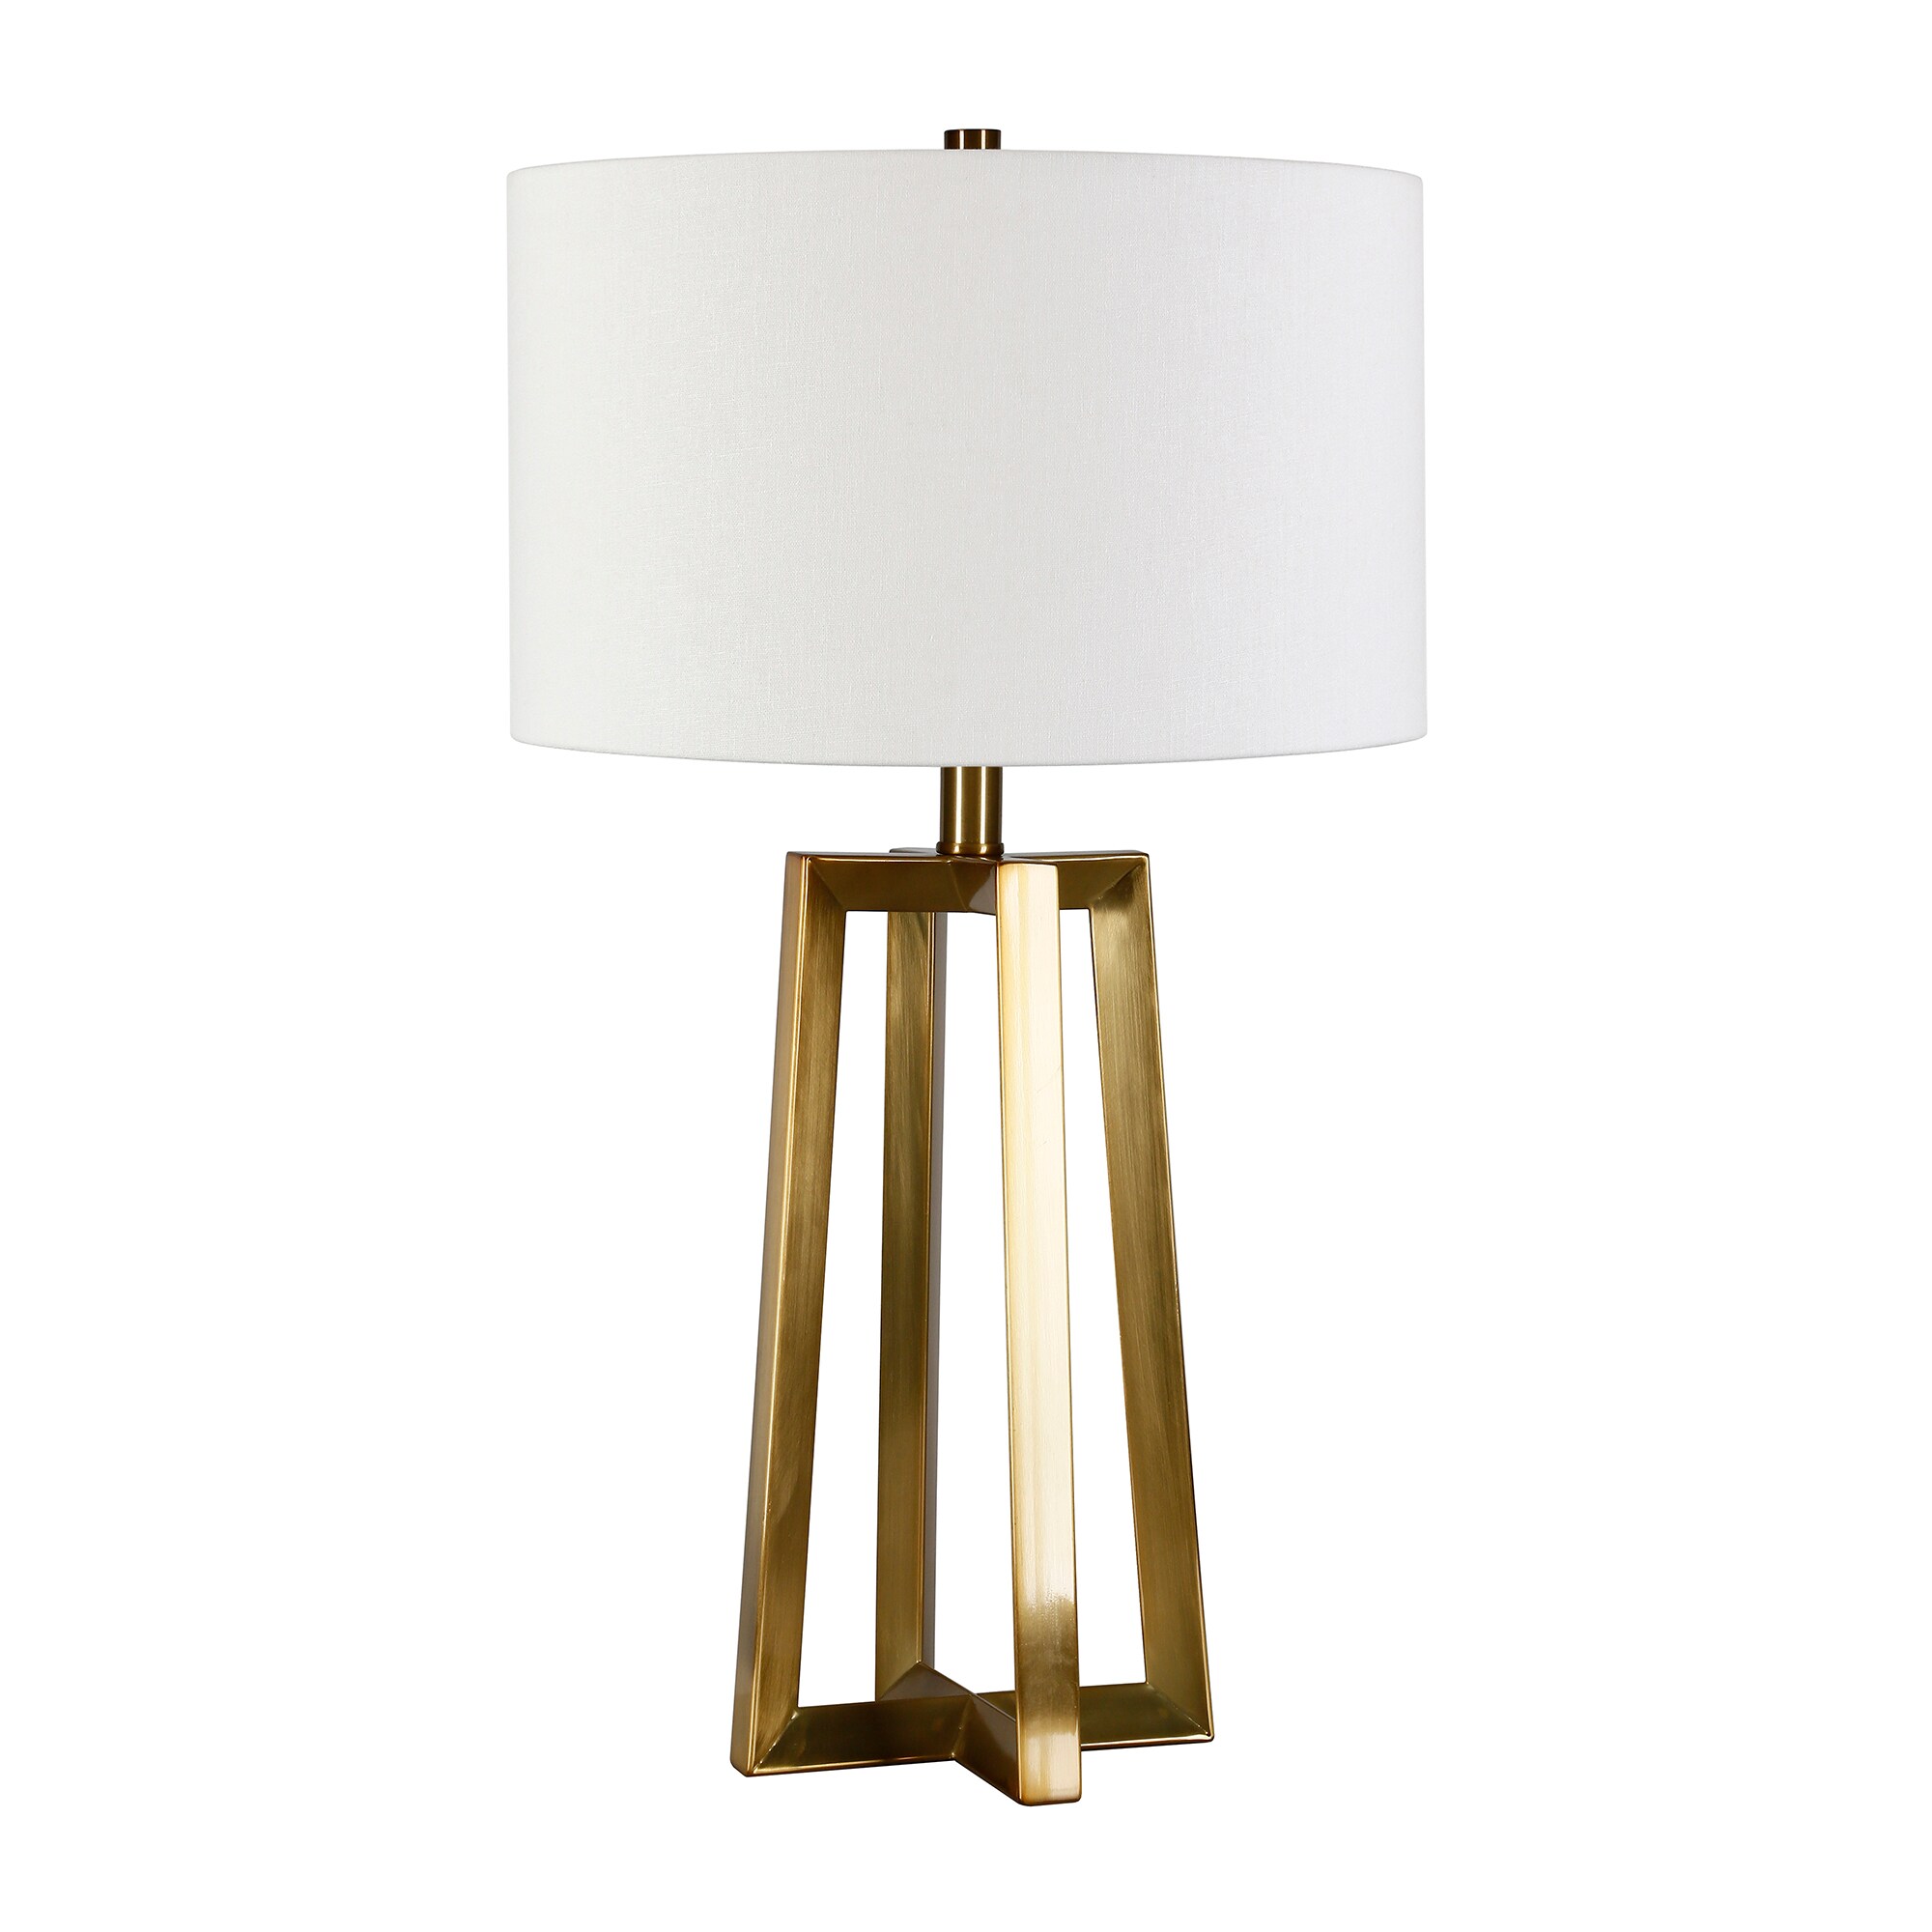 Hailey Home Helena 24.5-in Brass LED Rotary Socket Table Lamp with Fabric Shade